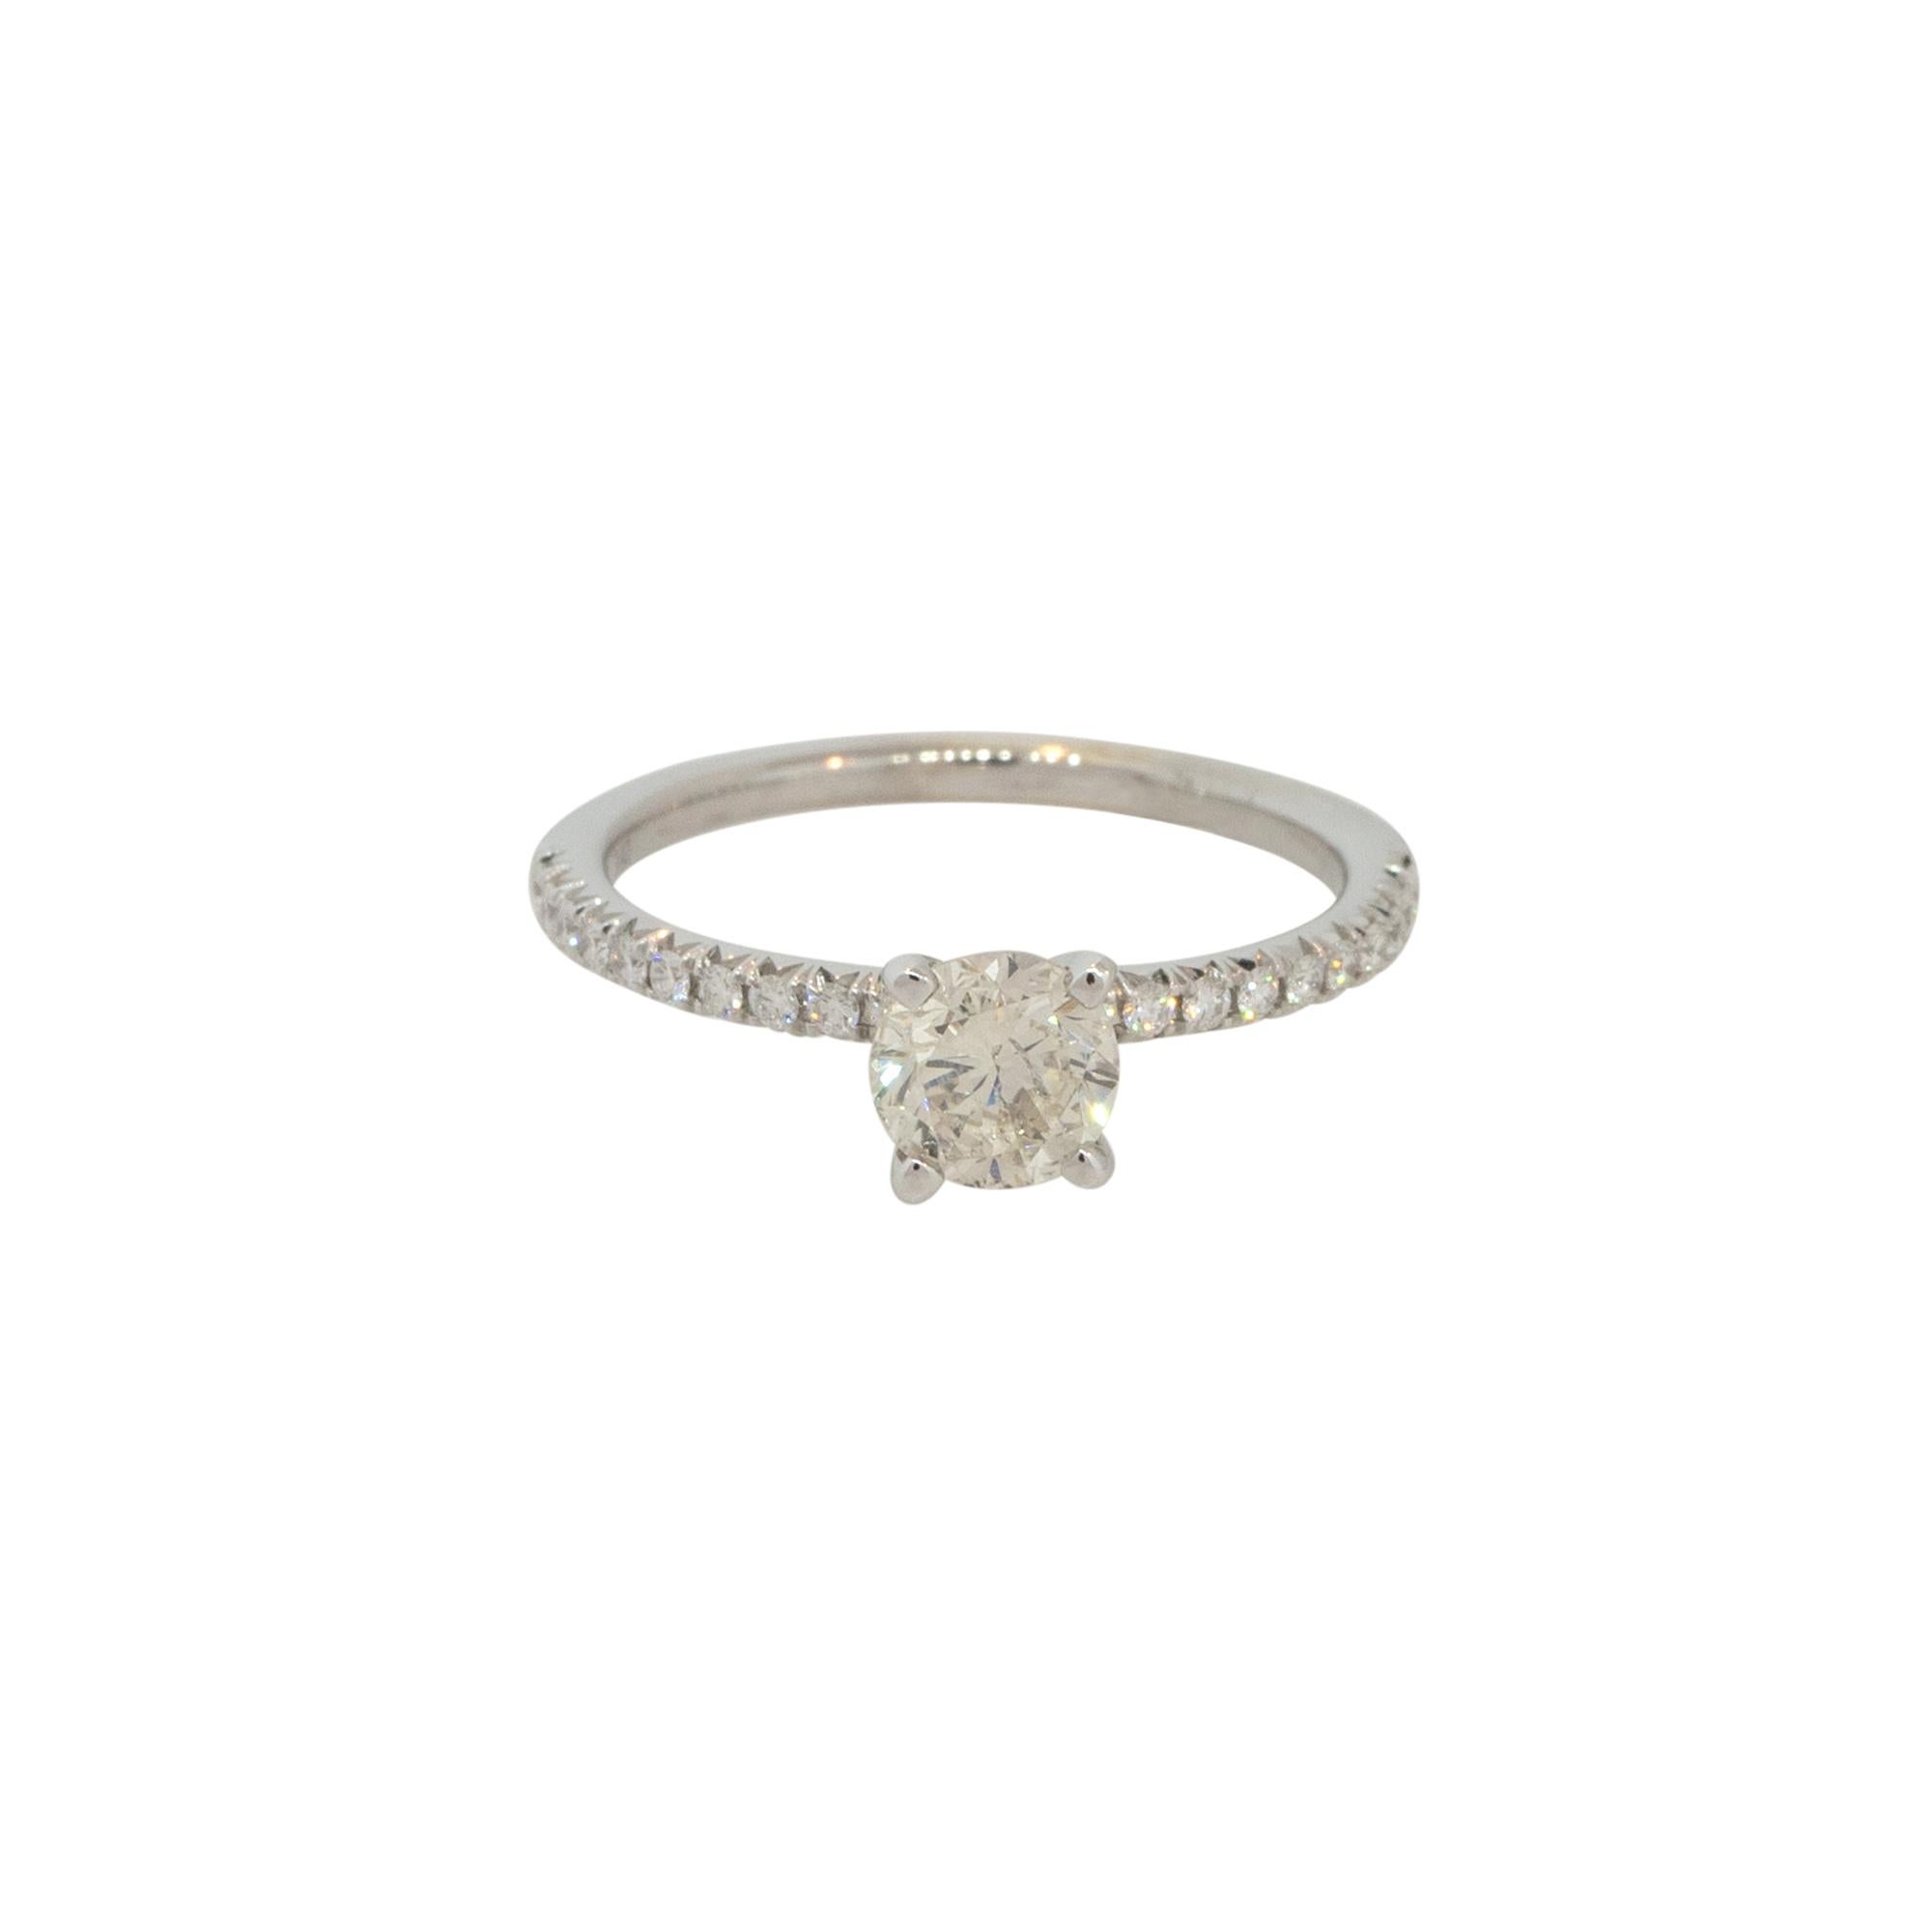 14k White Gold 0.93ctw Round Diamond Solitaire Engagement Ring

Raymond Lee Jewelers in Boca Raton -- South Florida’s destination for diamonds, fine jewelry, antique jewelry, estate pieces, and vintage jewels.

Style: Women's 4 Prong Engagement